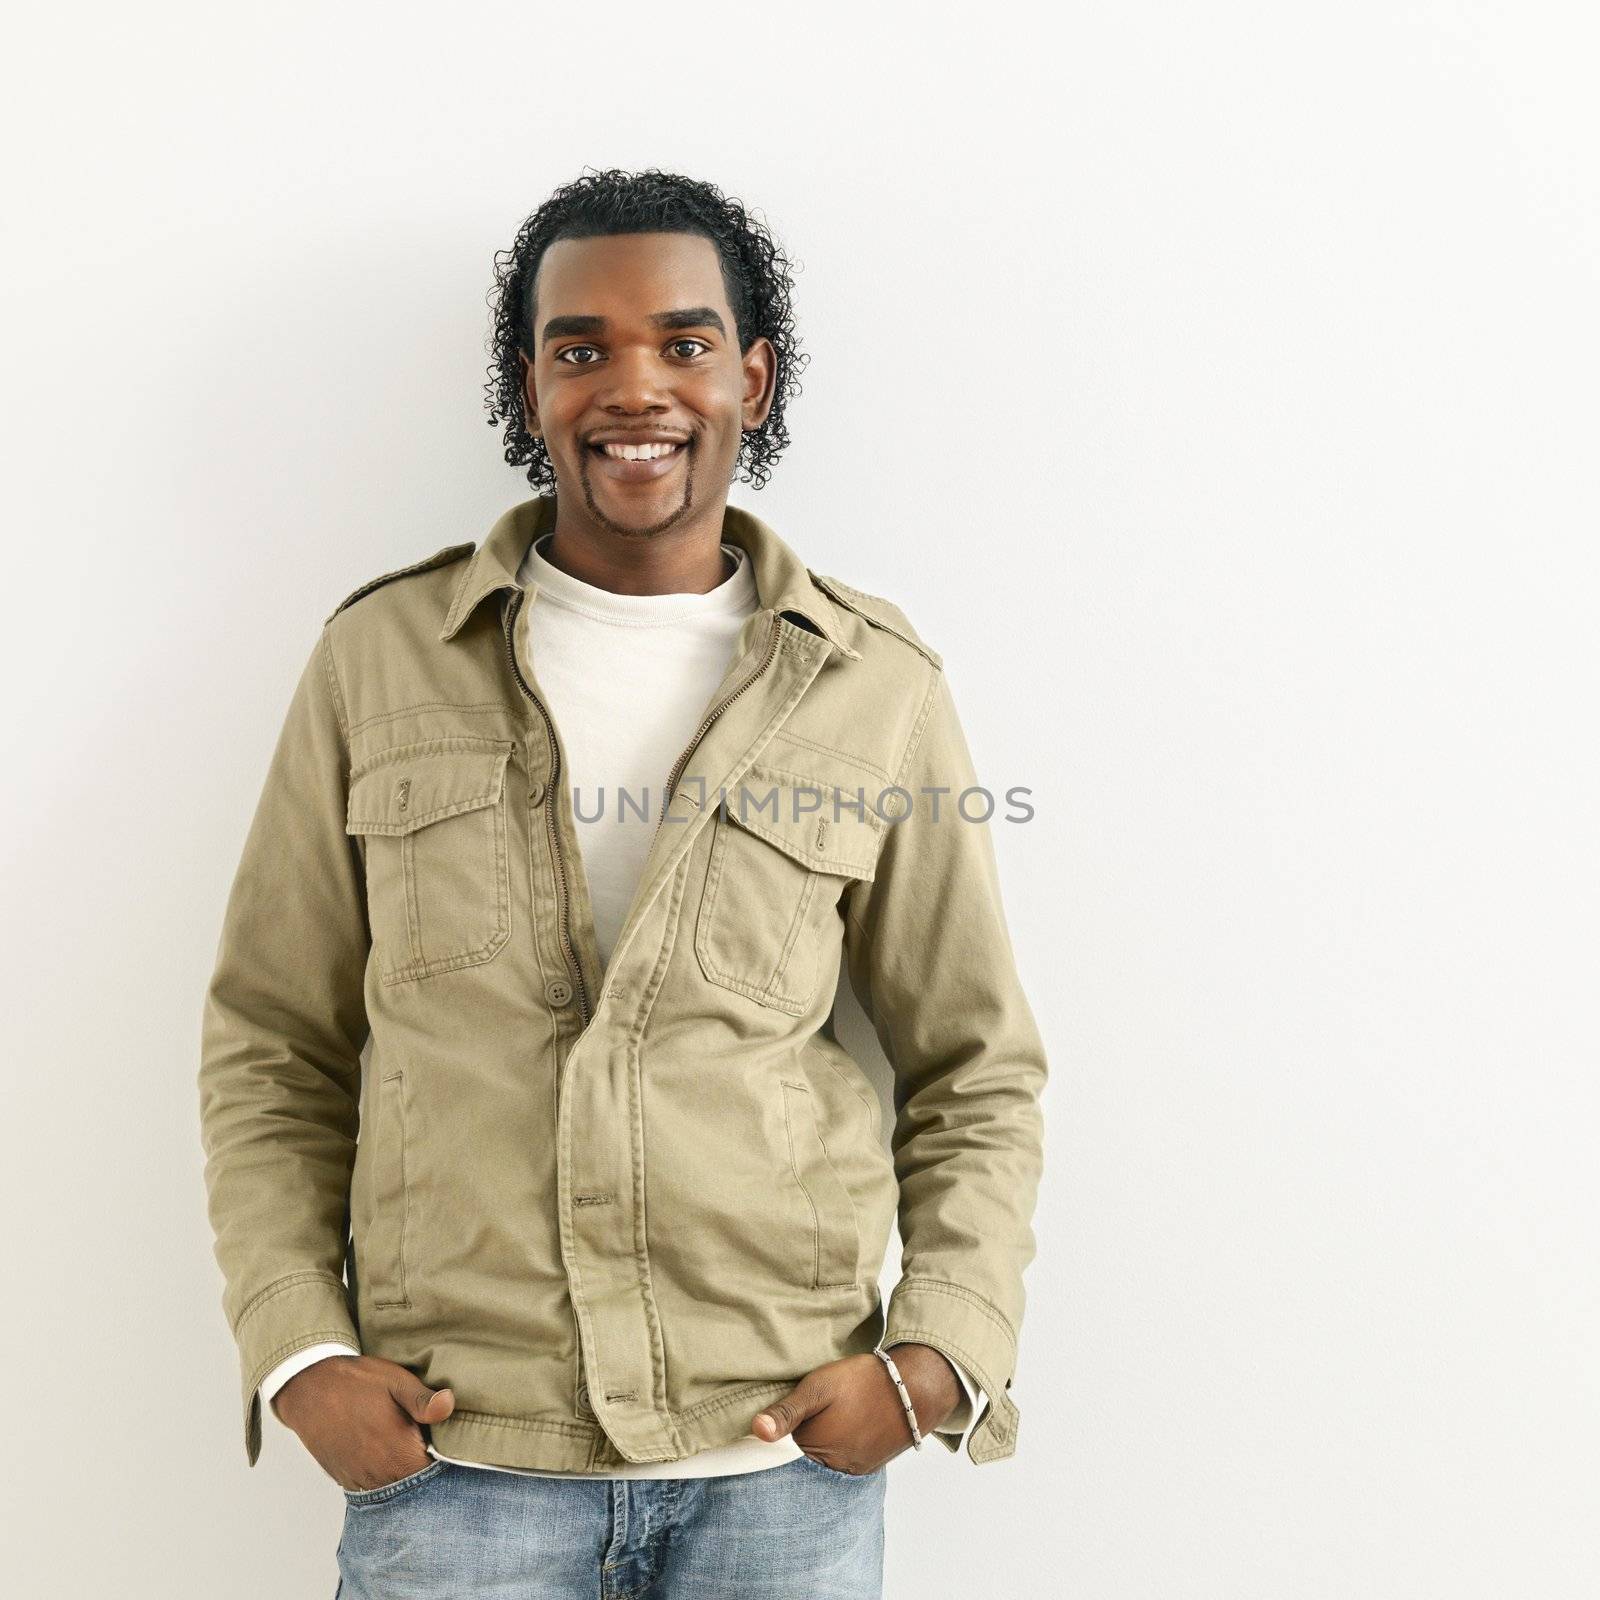 Portrait of smiling man standing against white background.